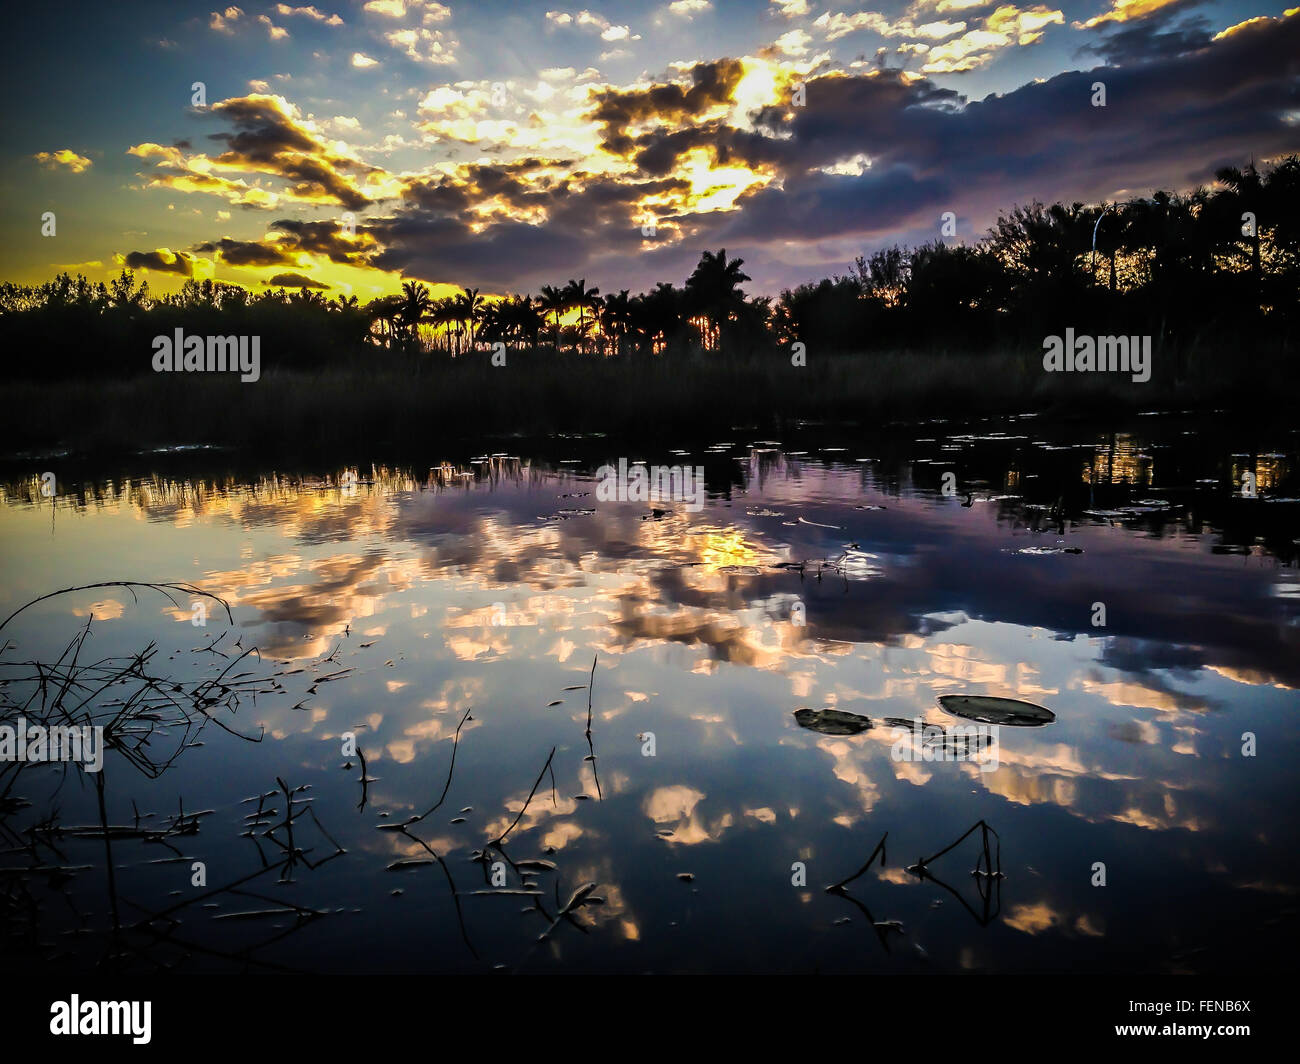 The reflection of sunset clouds on the water of a lake / swamp in Florida. The colors and light mirror on the water. Stock Photo